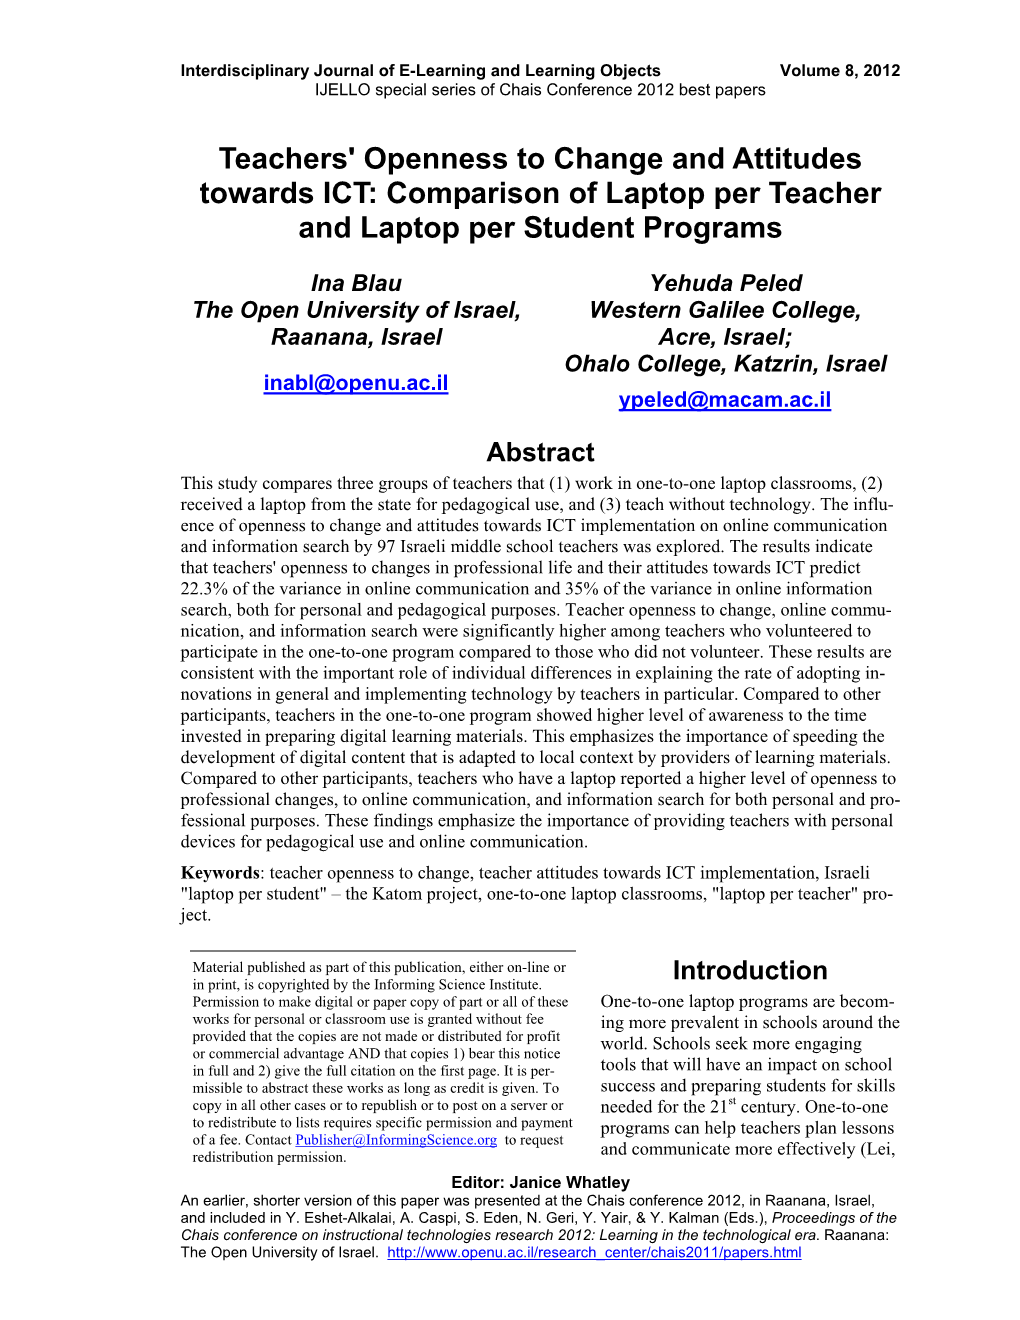 Teachers' Openness to Change and Attitudes Towards ICT: Comparison of Laptop Per Teacher and Laptop Per Student Programs